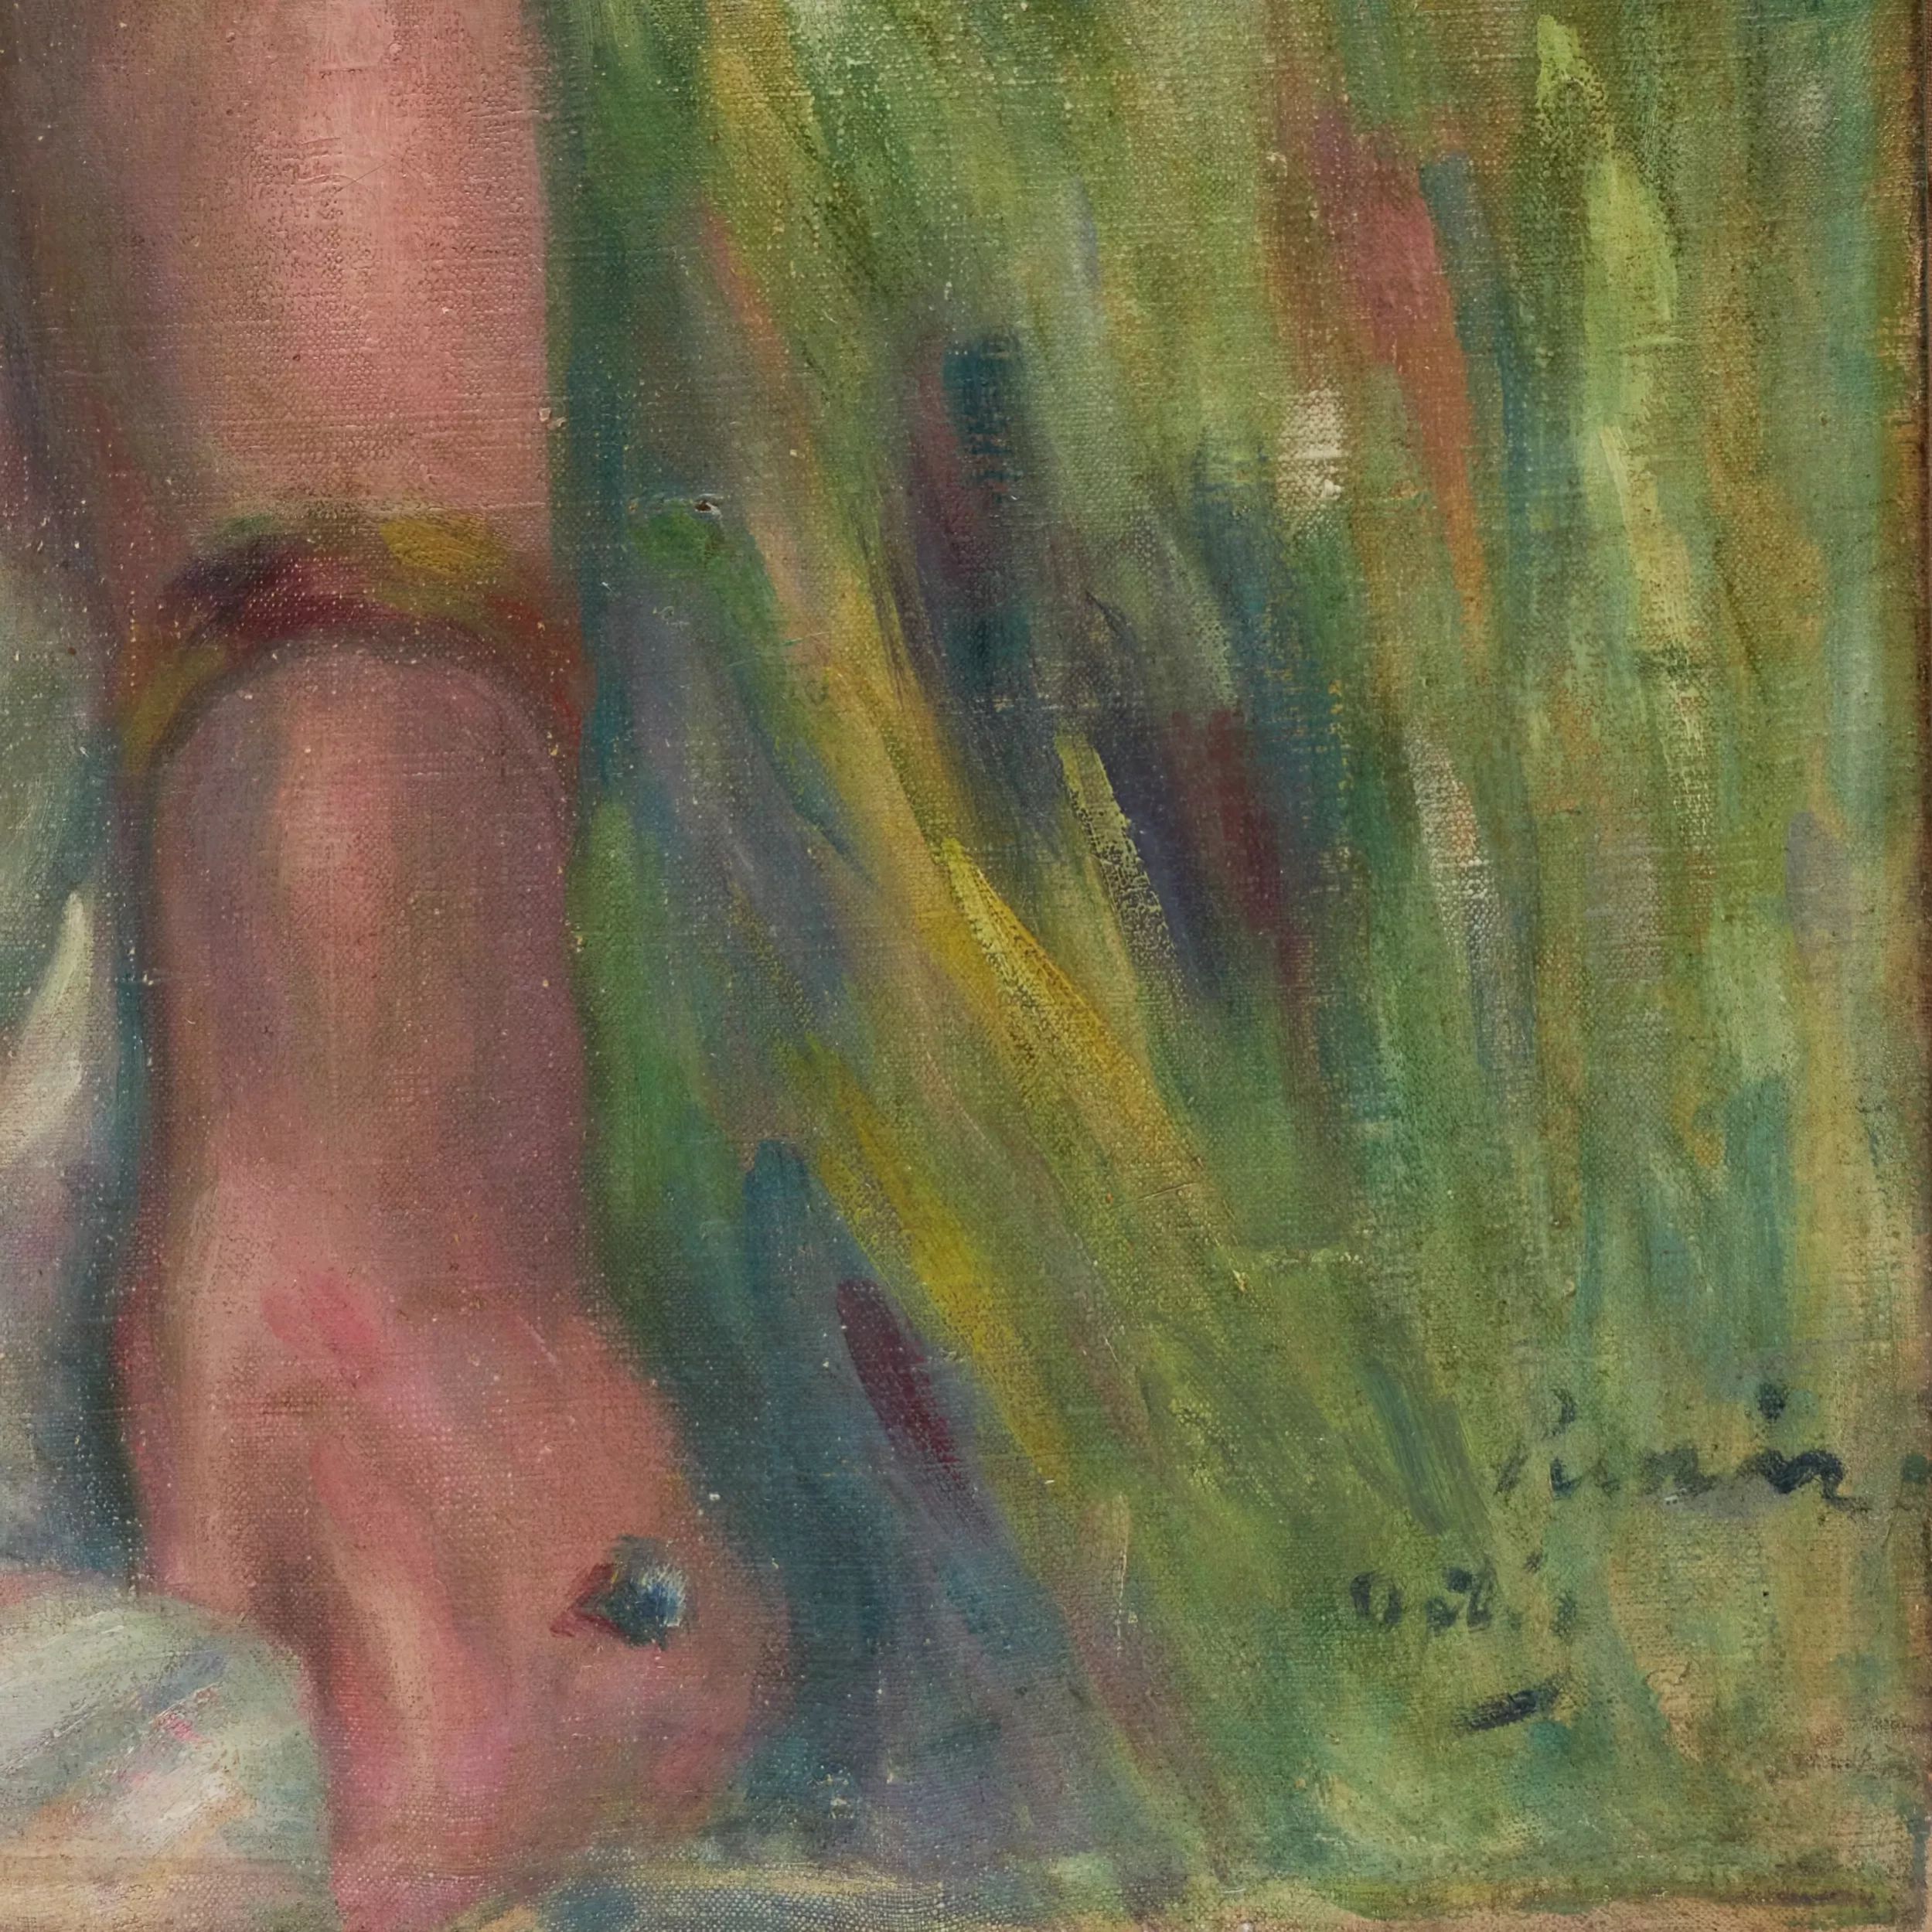 Bather in sunny shade, in the manner of Pierre-Auguste Renoir (1841-1919). - Image 4 of 6